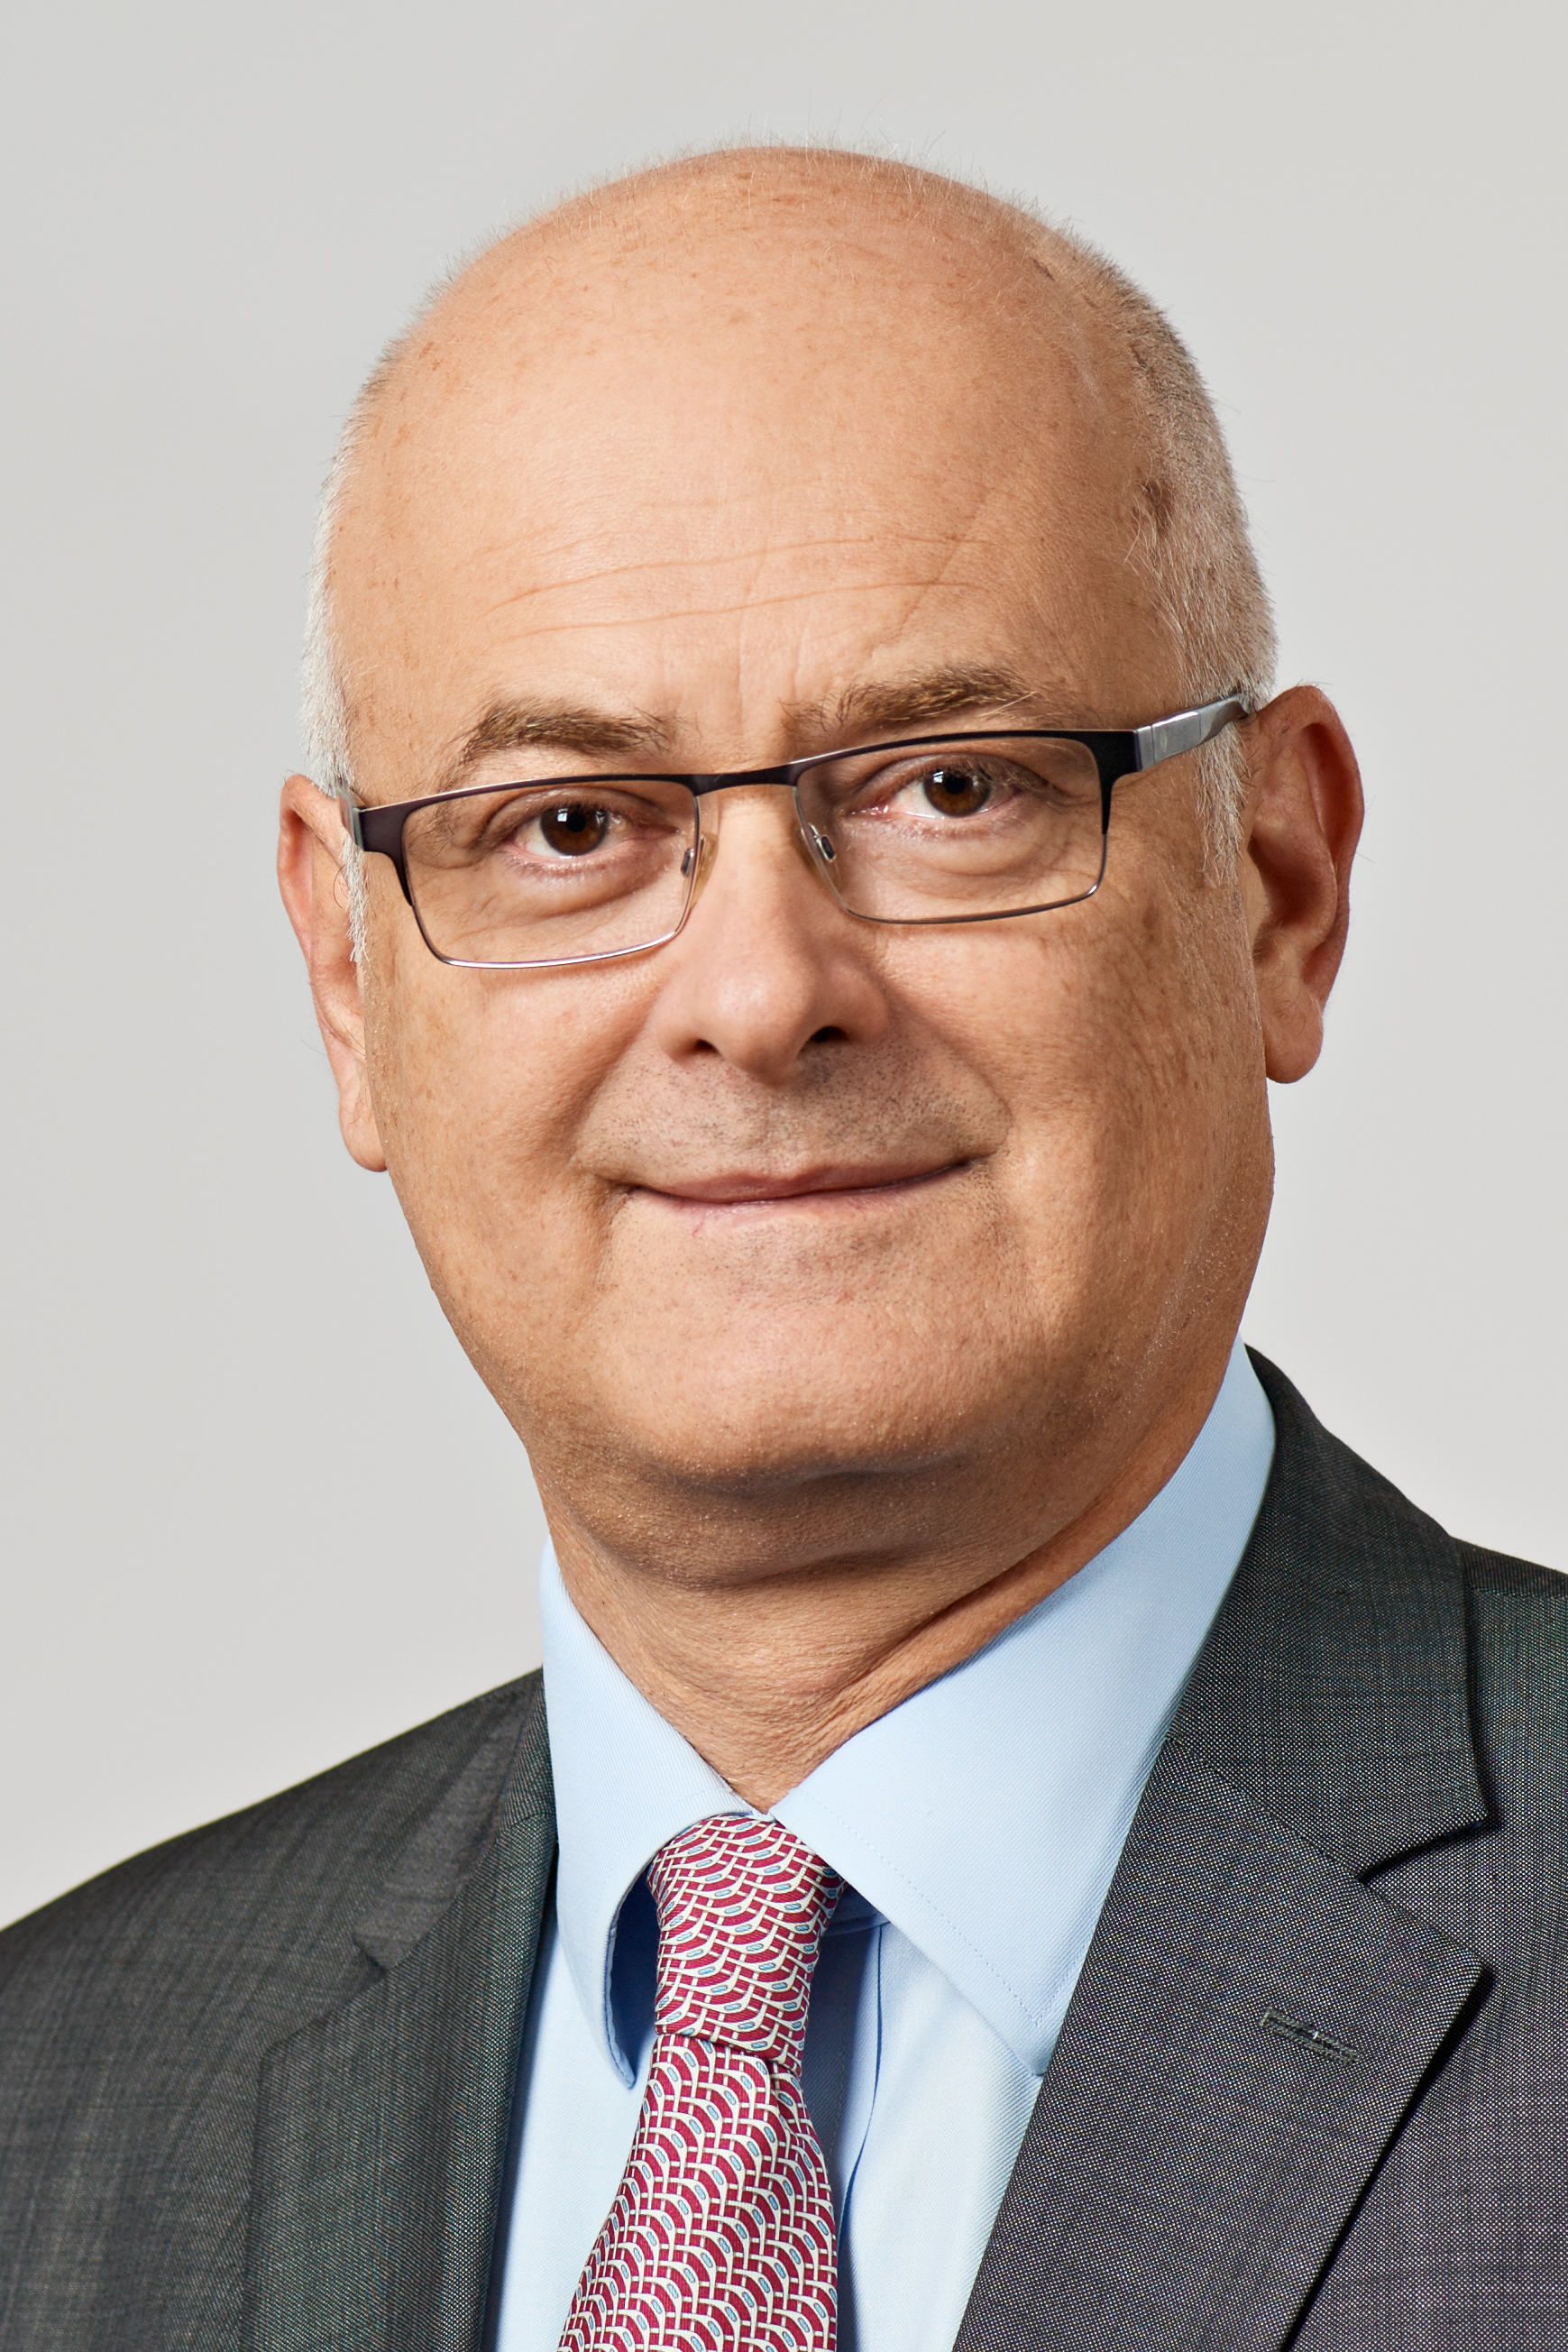 Richard Clemens, General Manager of the Food and Packaging Machinery Division of the Association of German Machine and Plant Manufacturers (Verband Deutscher Maschinen und Anlagenbau – VDMA (Source: Uwe Noelke)